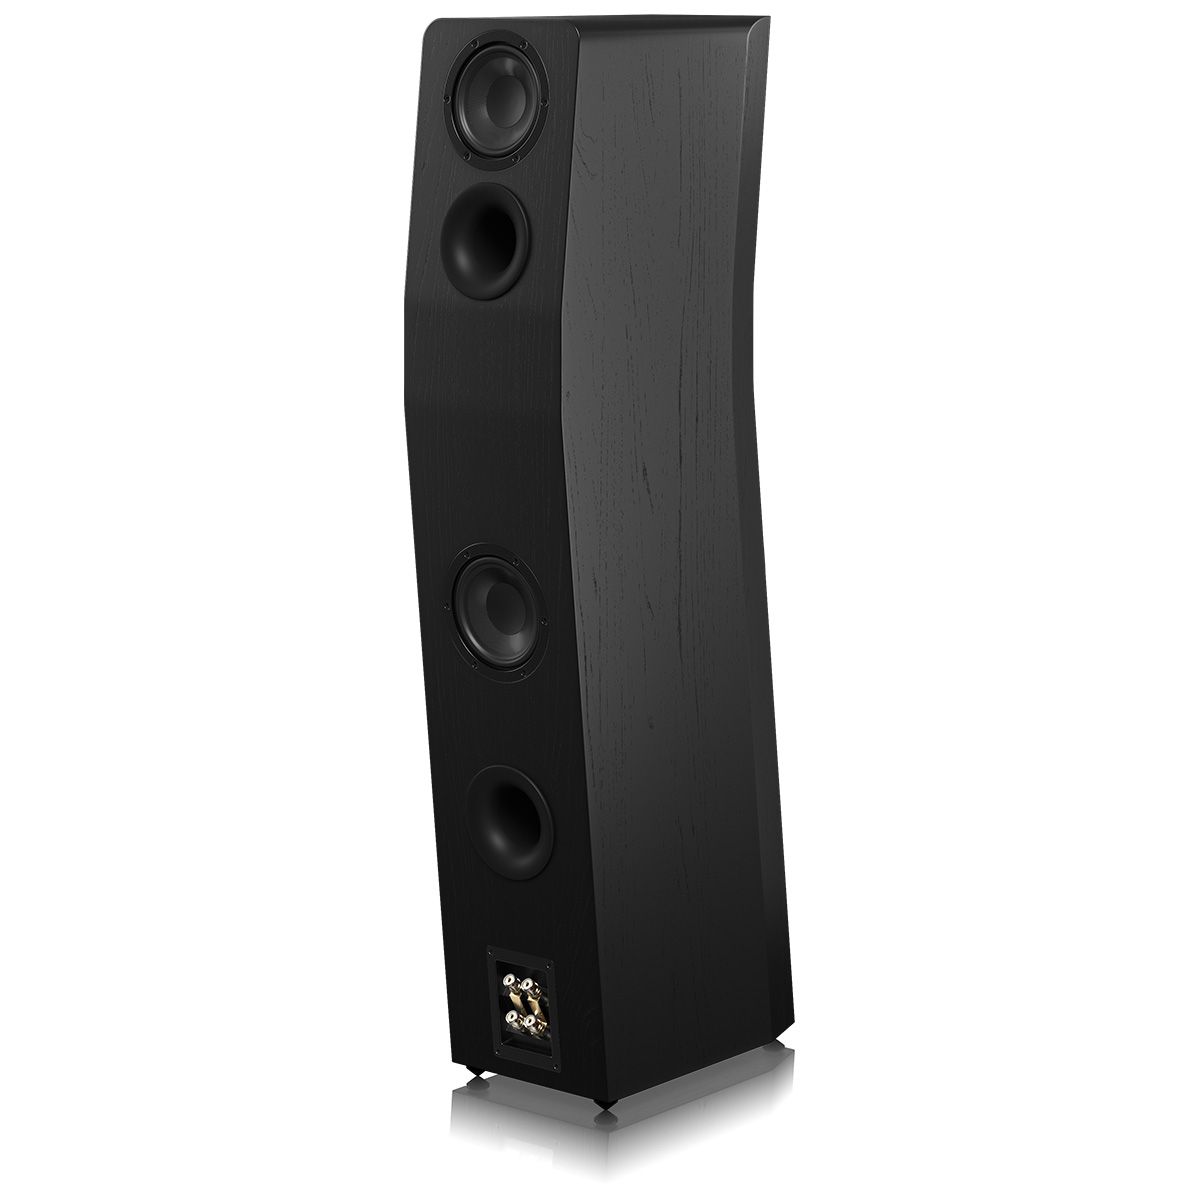 SVS Ultra Evolution Tower Floorstanding Loudspeaker - single black oak with grille - angled rear view with components